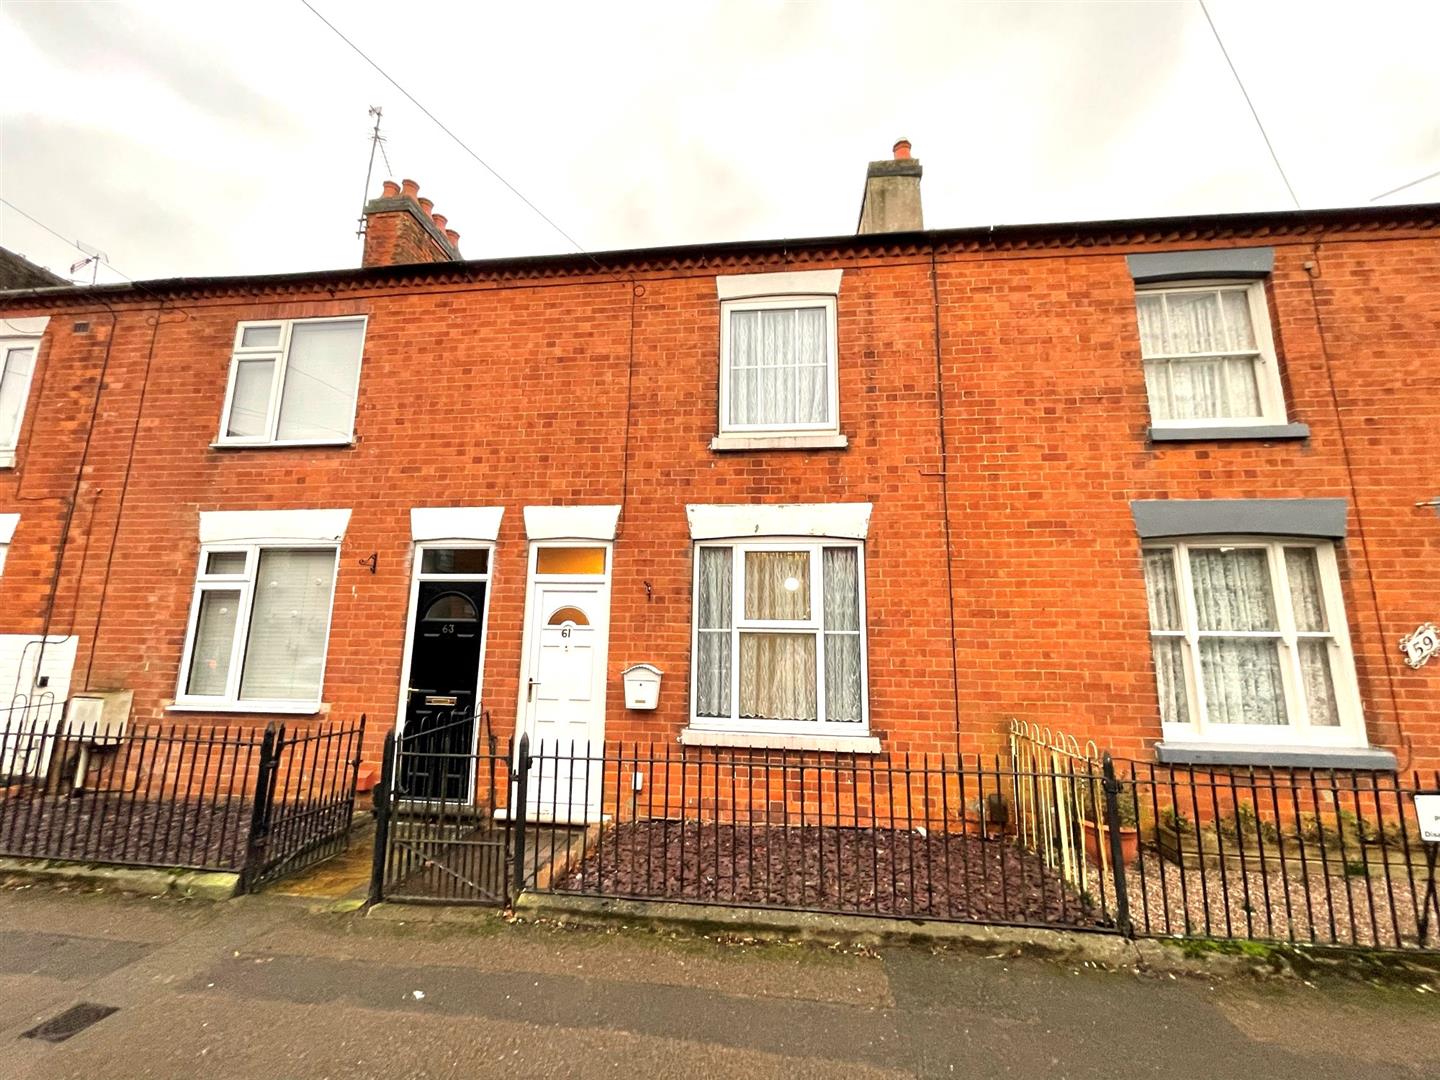 2 Bedroom Terraced House For Sale In Desborough Kettering 2229